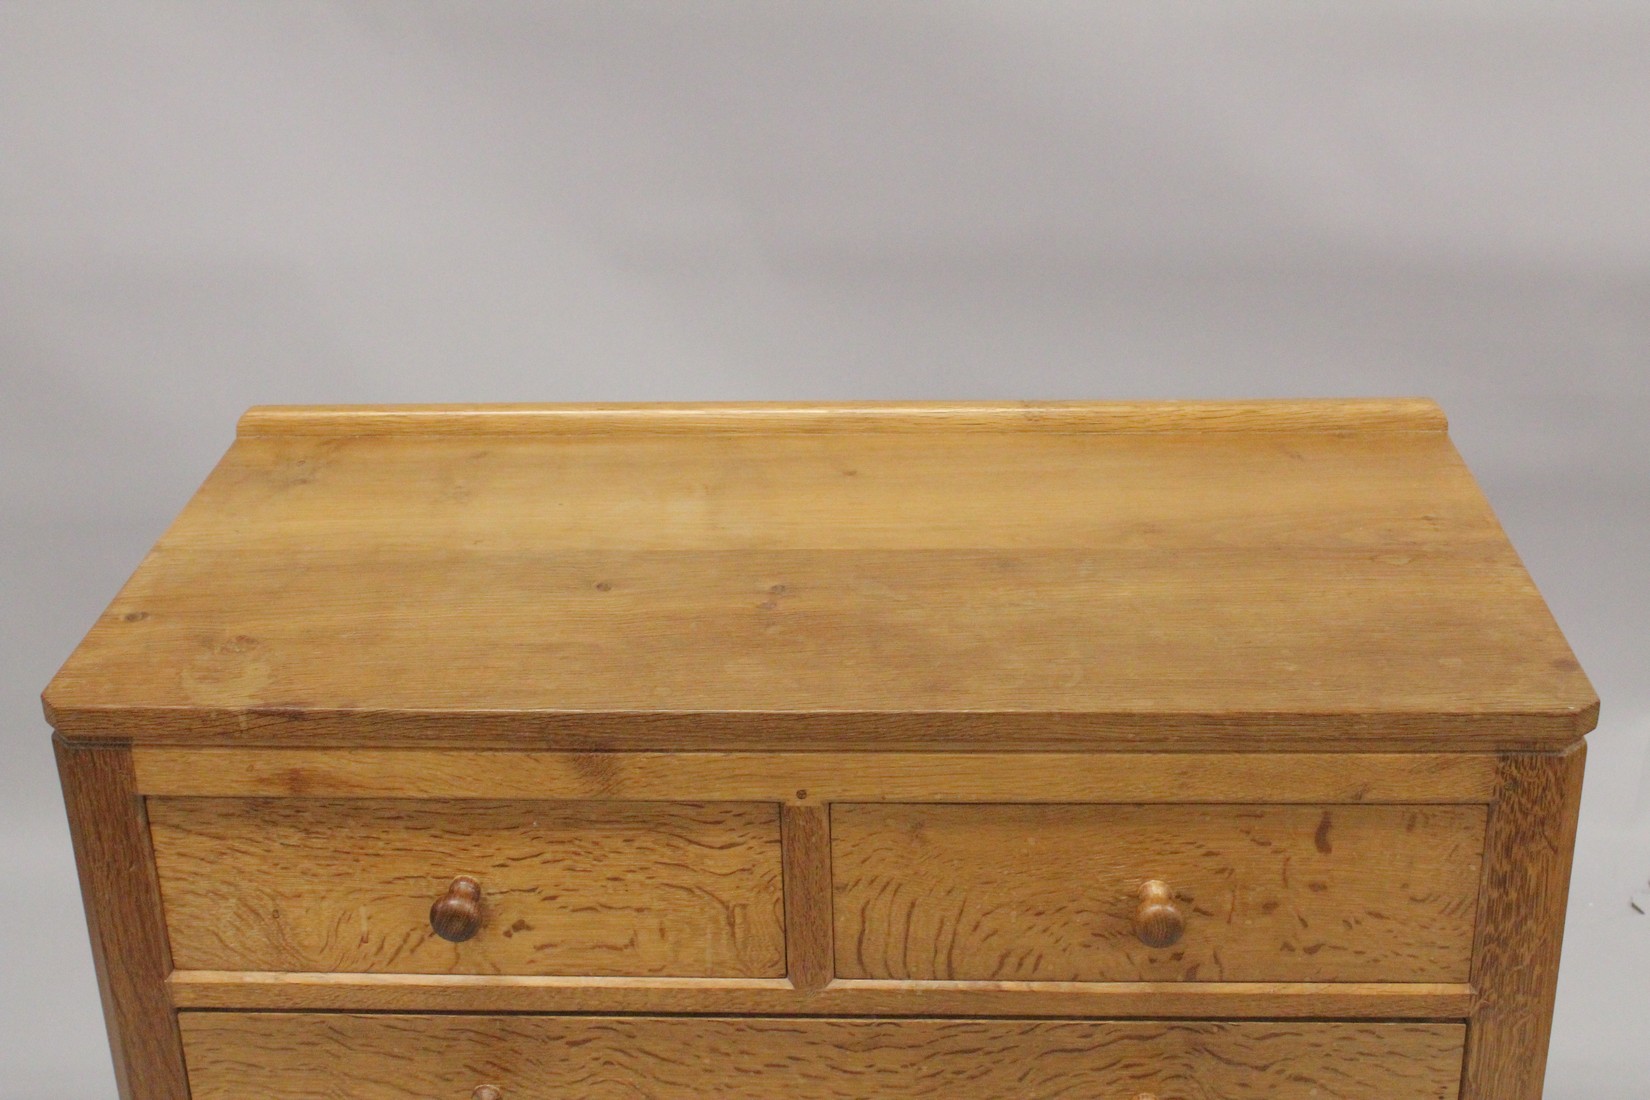 ROBERT "MOUSEMAN" THOMPSON. AN OAK CHEST OF DRAWERS, with adzed rectangular top, panelled ends, - Image 3 of 5